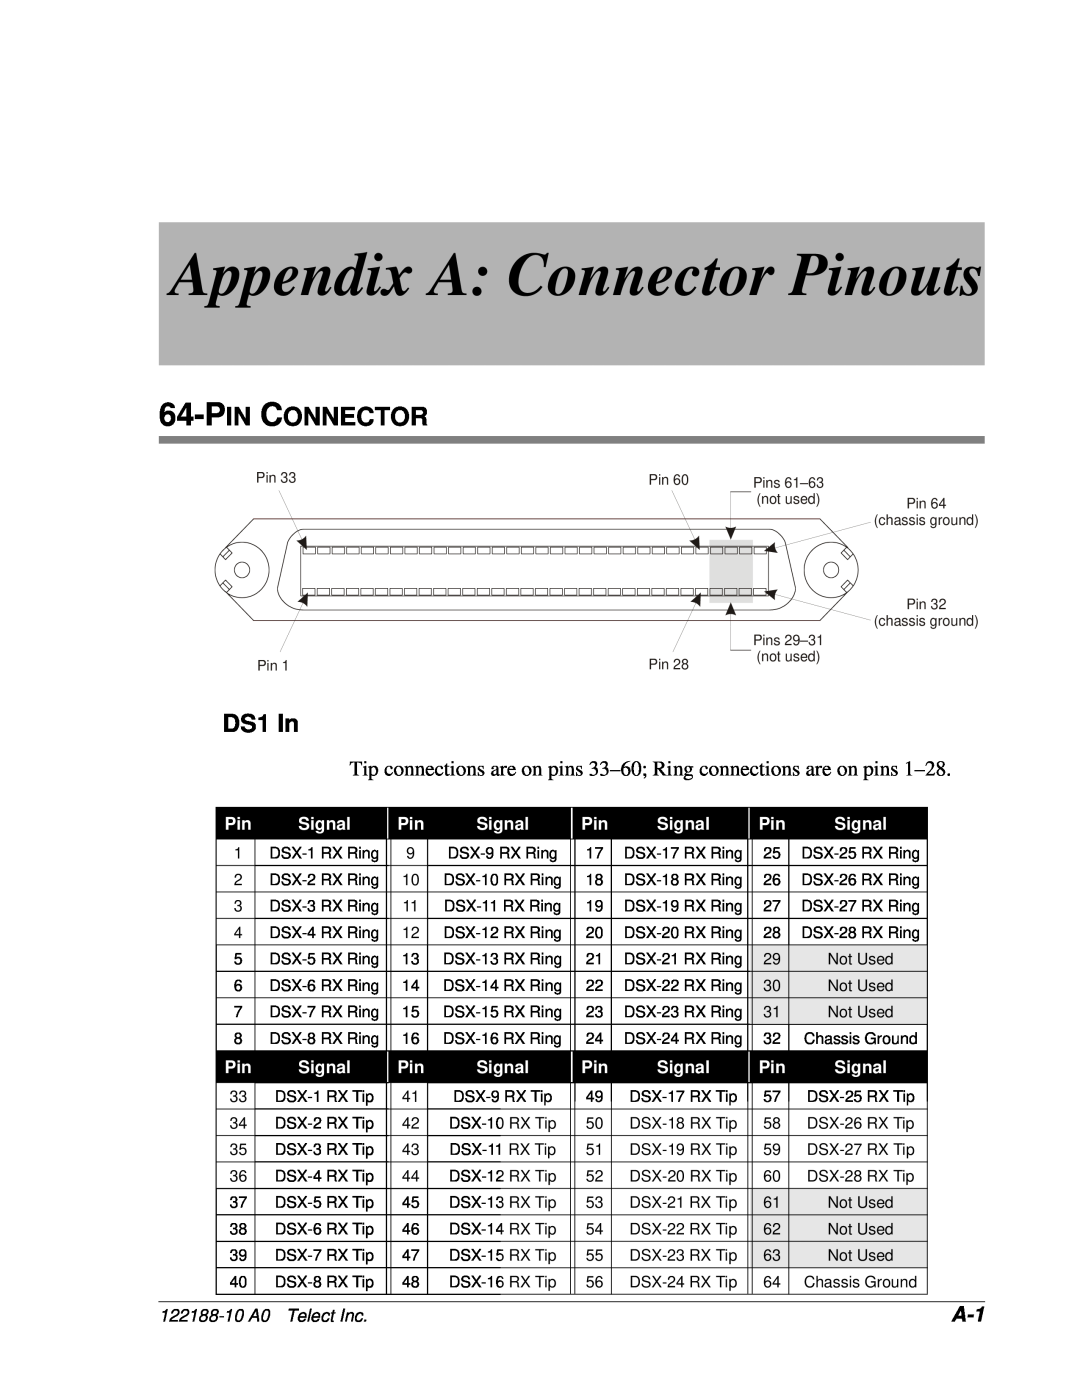 Telect MIX 56 user manual Pin Connector, DS1 In, Appendix A Connector Pinouts, Signal, 122188-10 A0 Telect Inc 